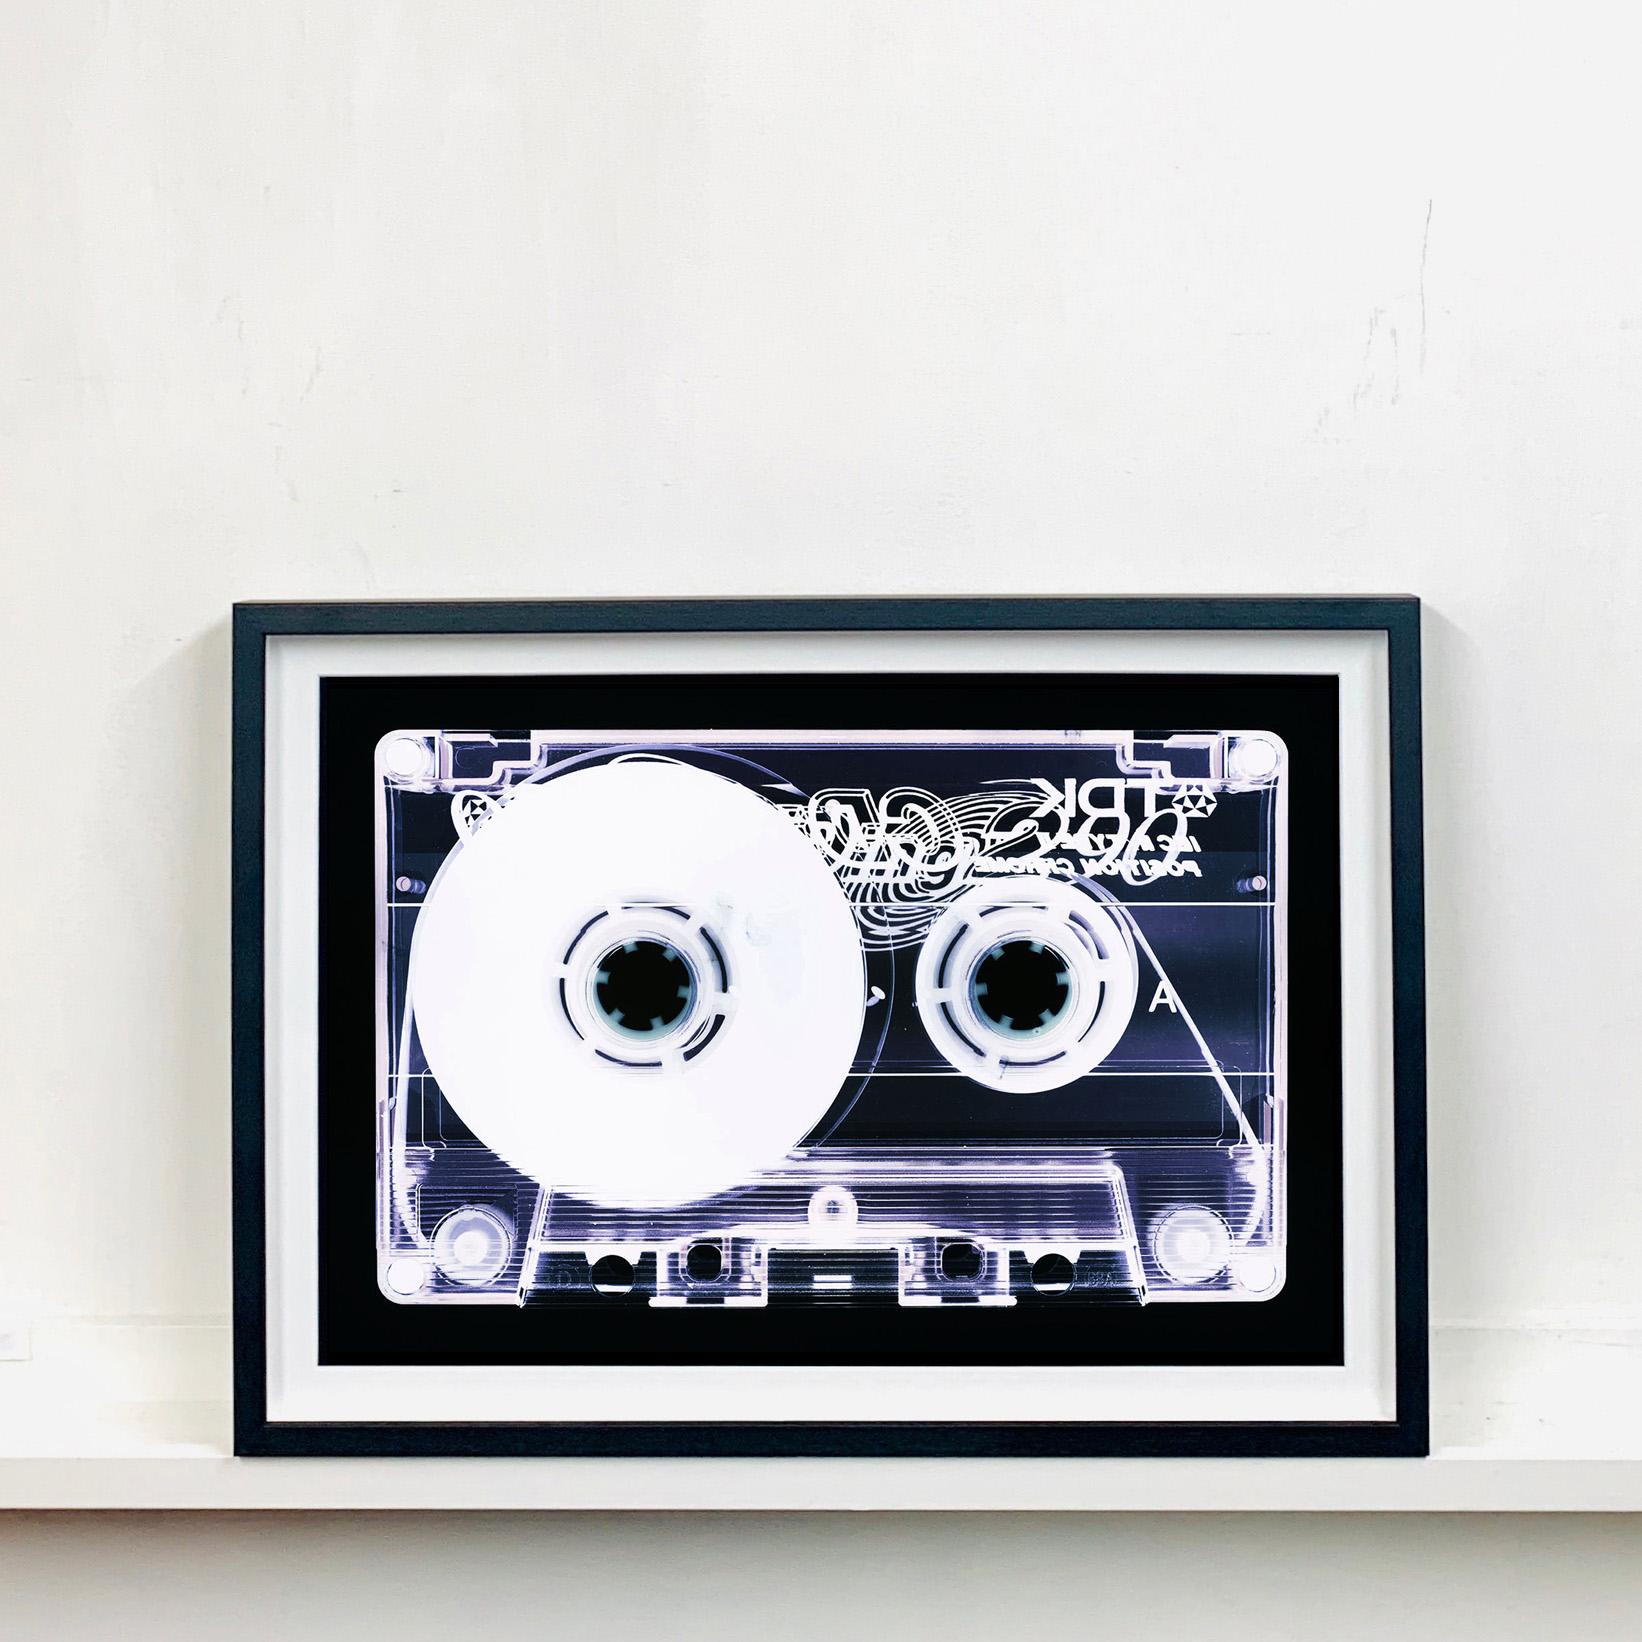 Tape Collection - Blank Tape Side A - Conceptual Color Music Pop Art - Print by Heidler & Heeps